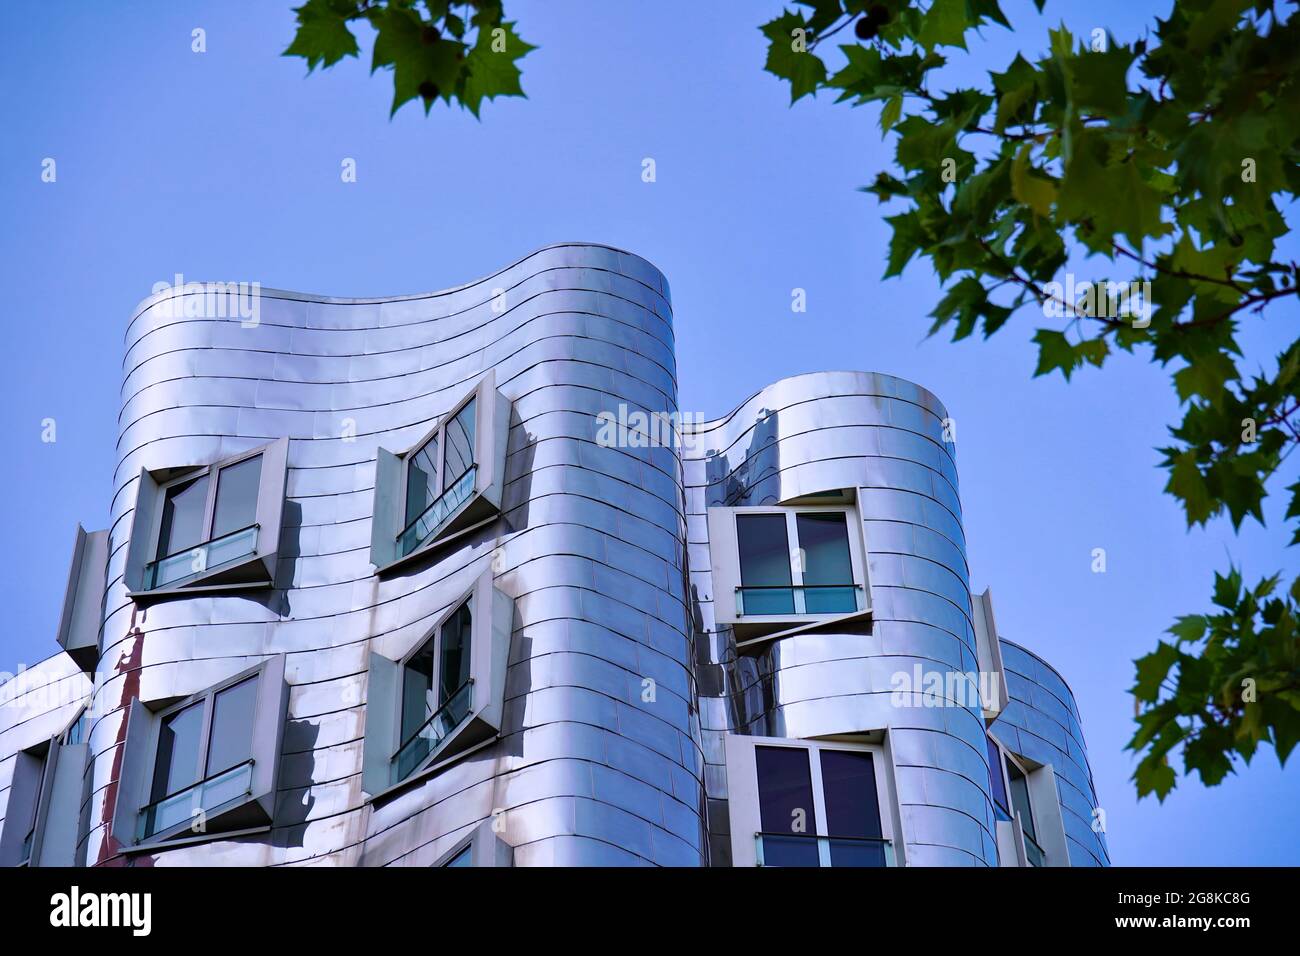 A modern art building designed by the American star architect Frank O. Gehry with reflecting stainless steel facade. Location: Düsseldorf Medienhafen. Stock Photo